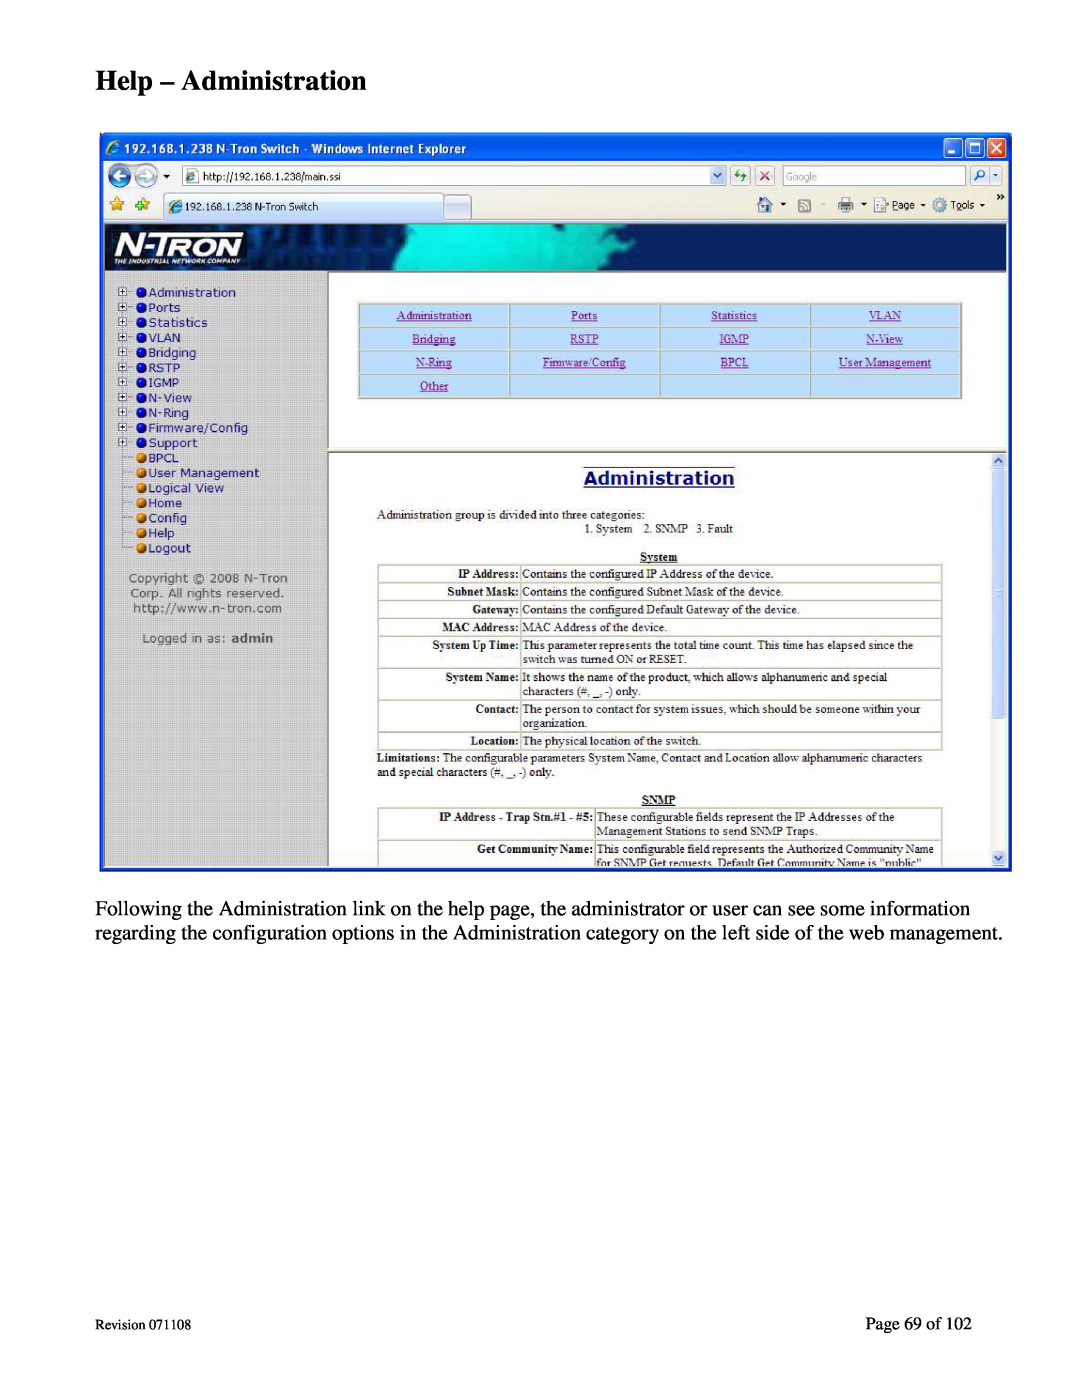 N-Tron 708M12 user manual Help - Administration, Page 69 of, Revision 